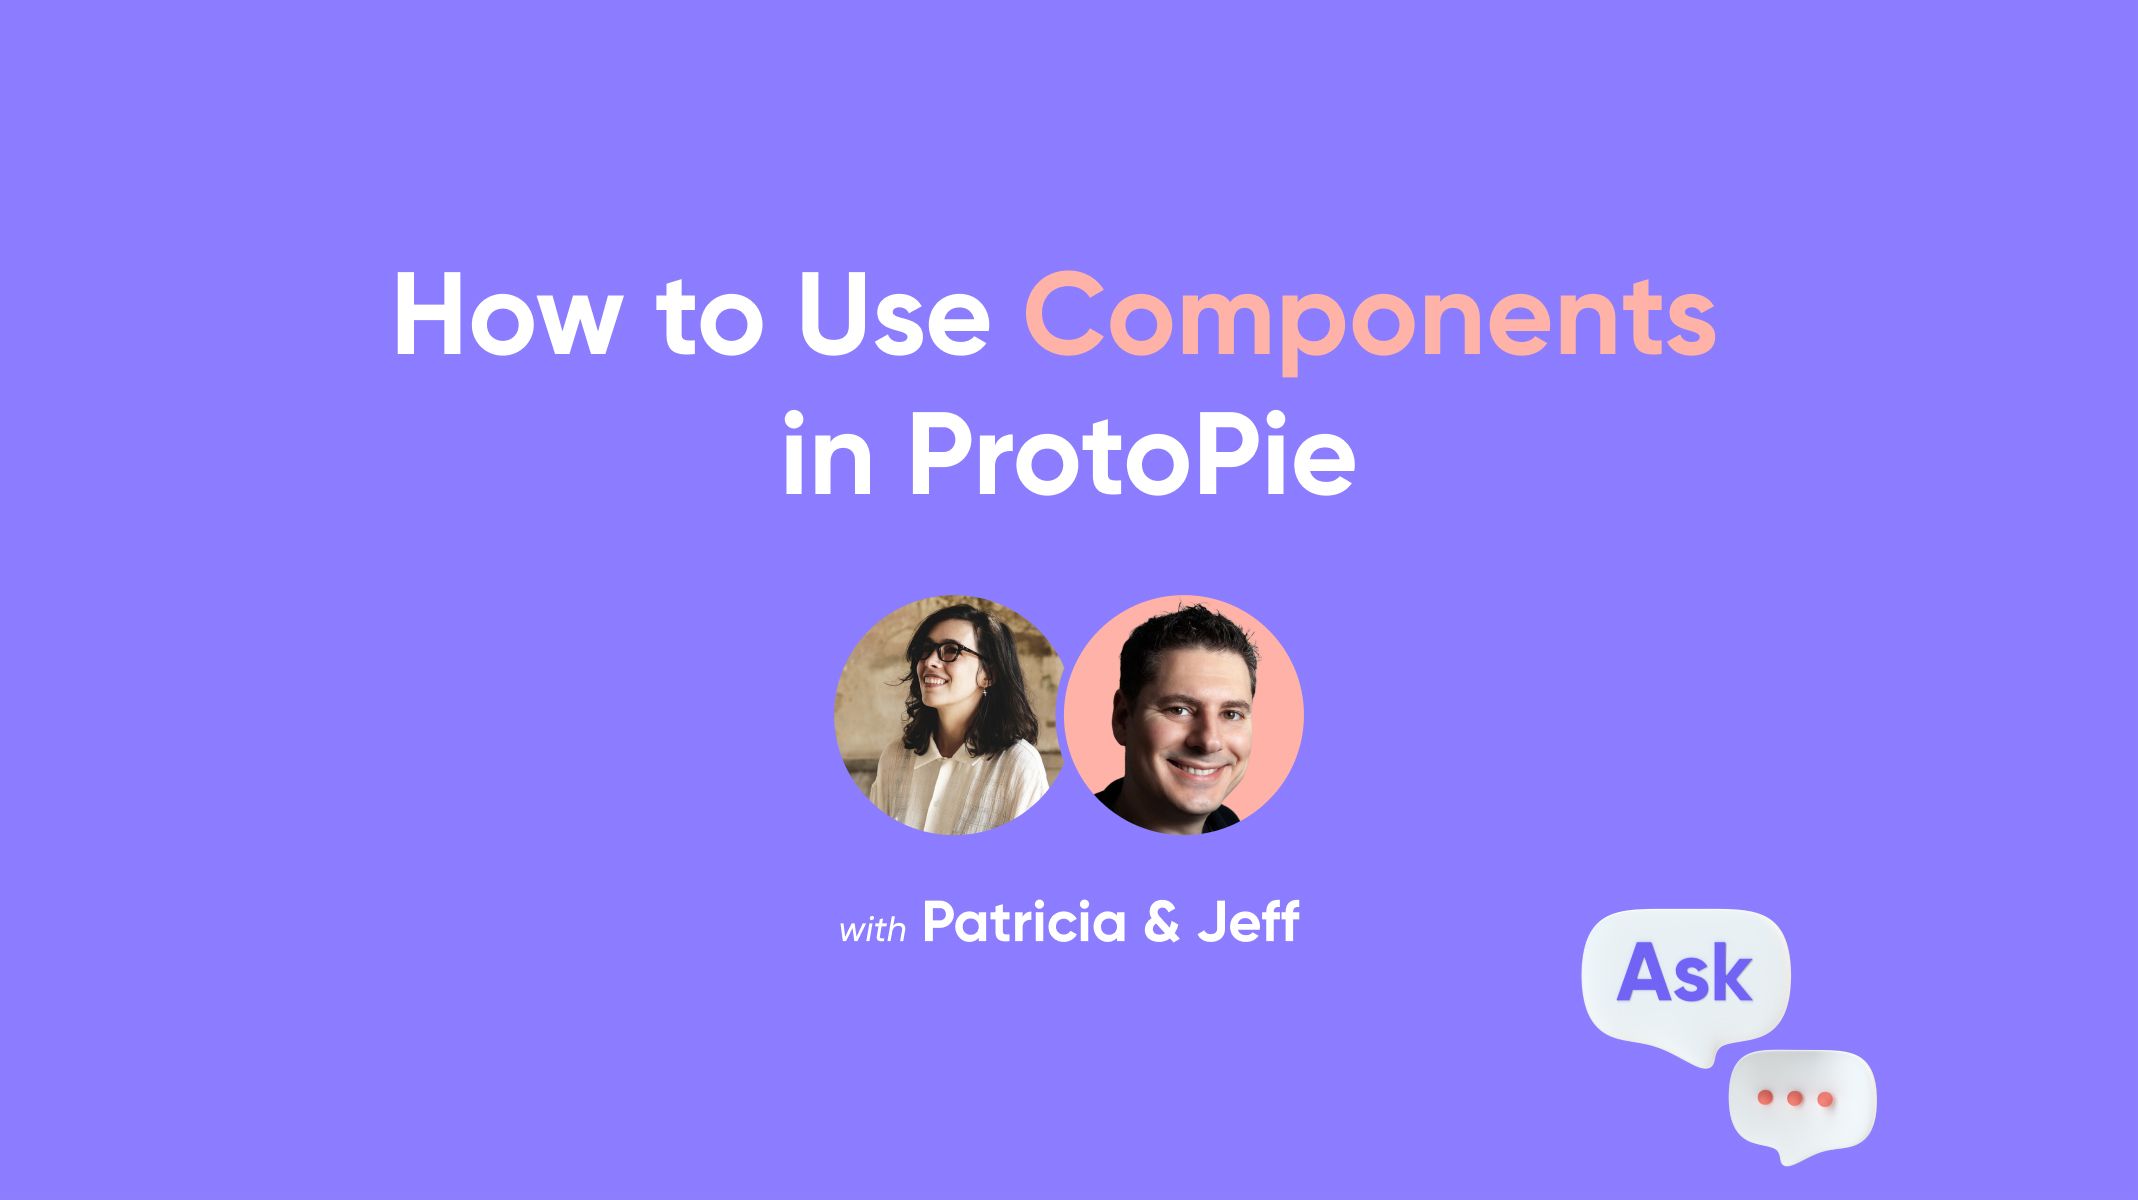 protopie expert jeff clarke teaches you how to use components in protopie